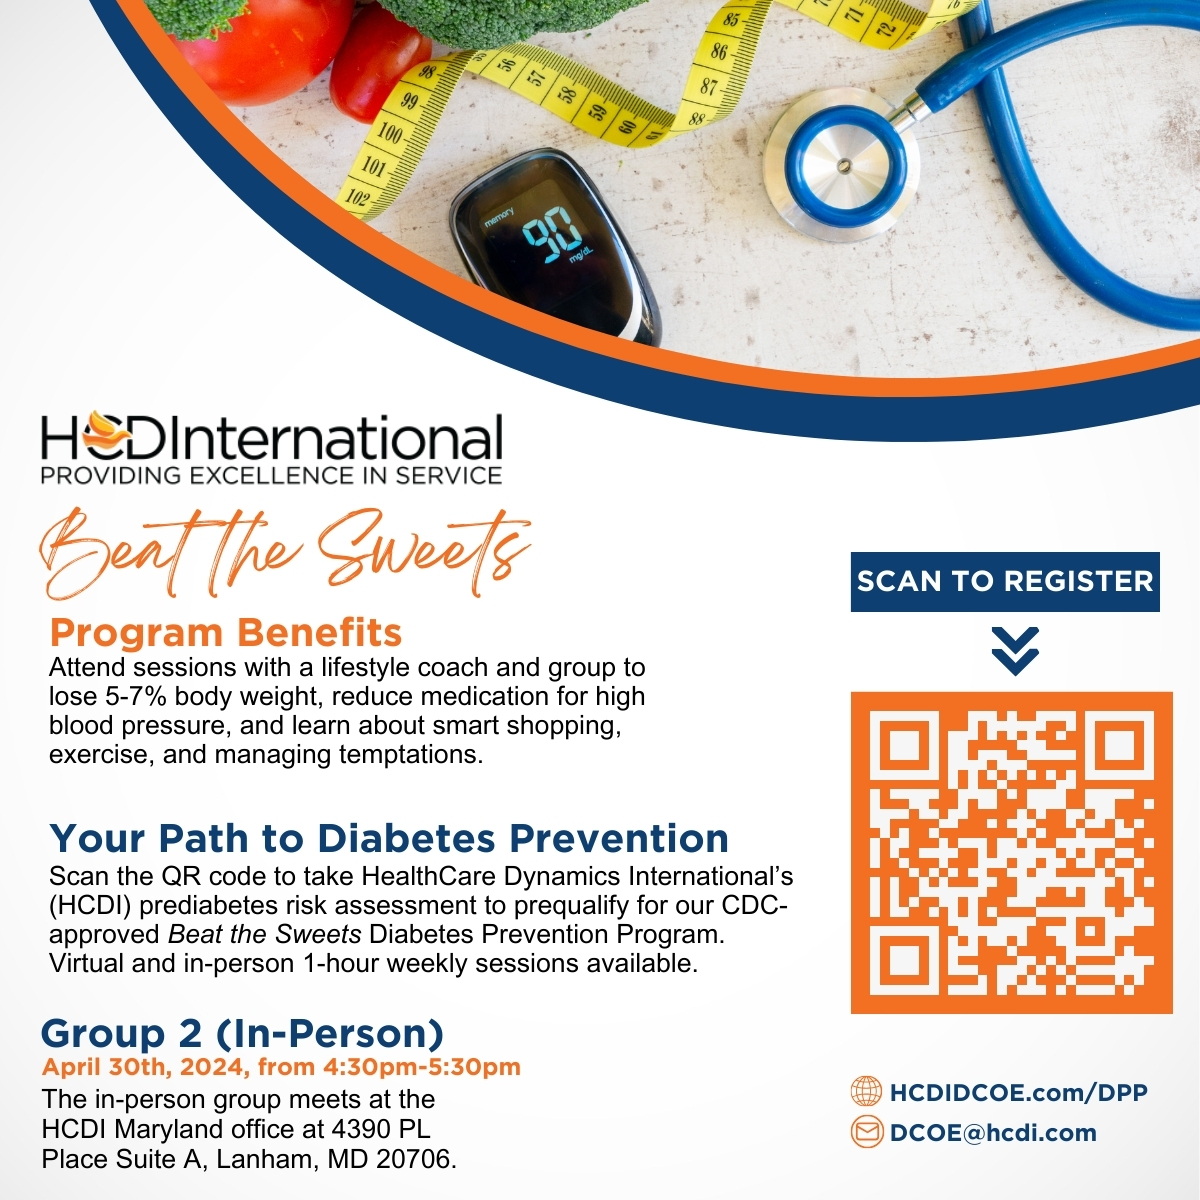 Join our Beat the Sweets Diabetes Prevention Program. Group 2 meets tomorrow from 4:30 to 5:30 p.m. at the HCDI office at 4390 Parliament Pl Ste A, Lanham, MD 20706. Scan the QR code or visit ow.ly/x4Qi50QW5zf.